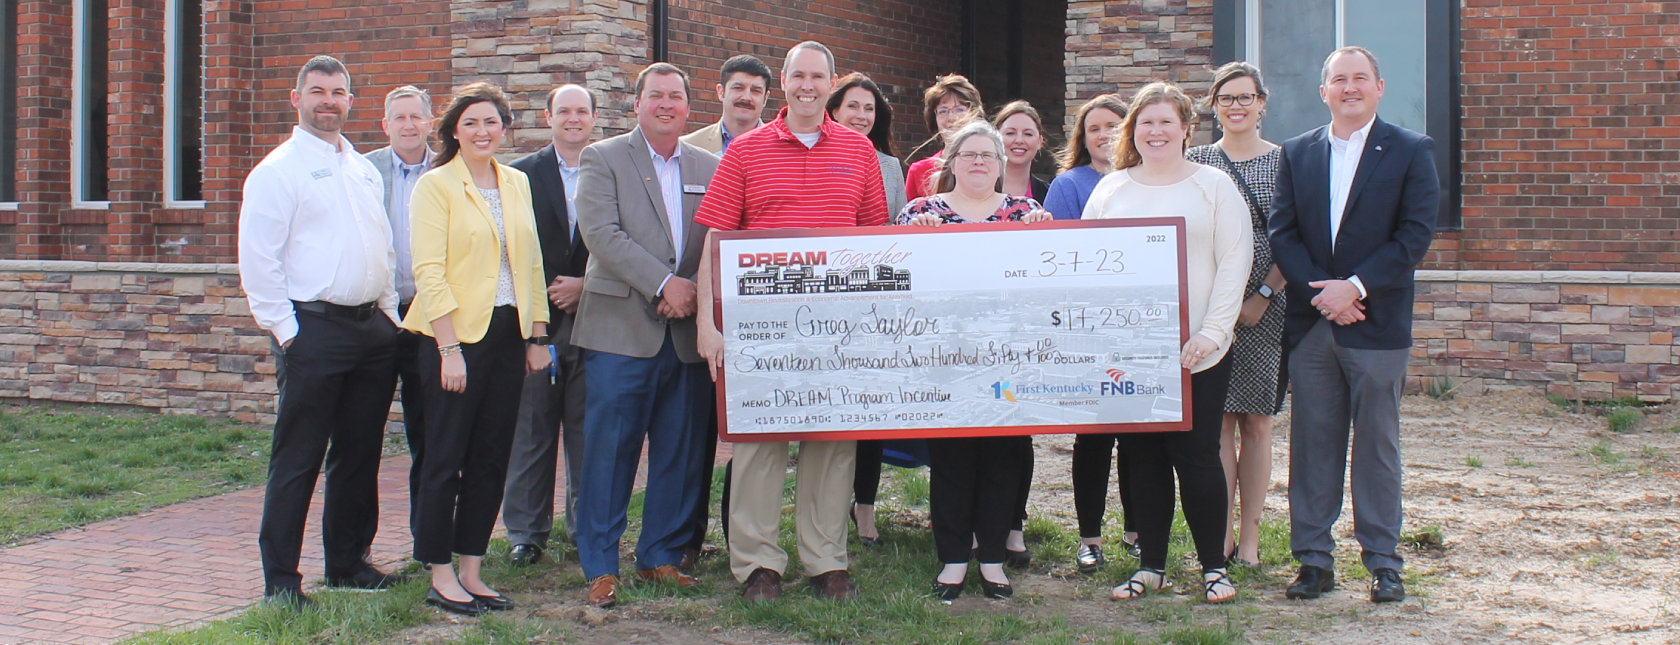 DREAM Check Presentation Held for Home Team Title